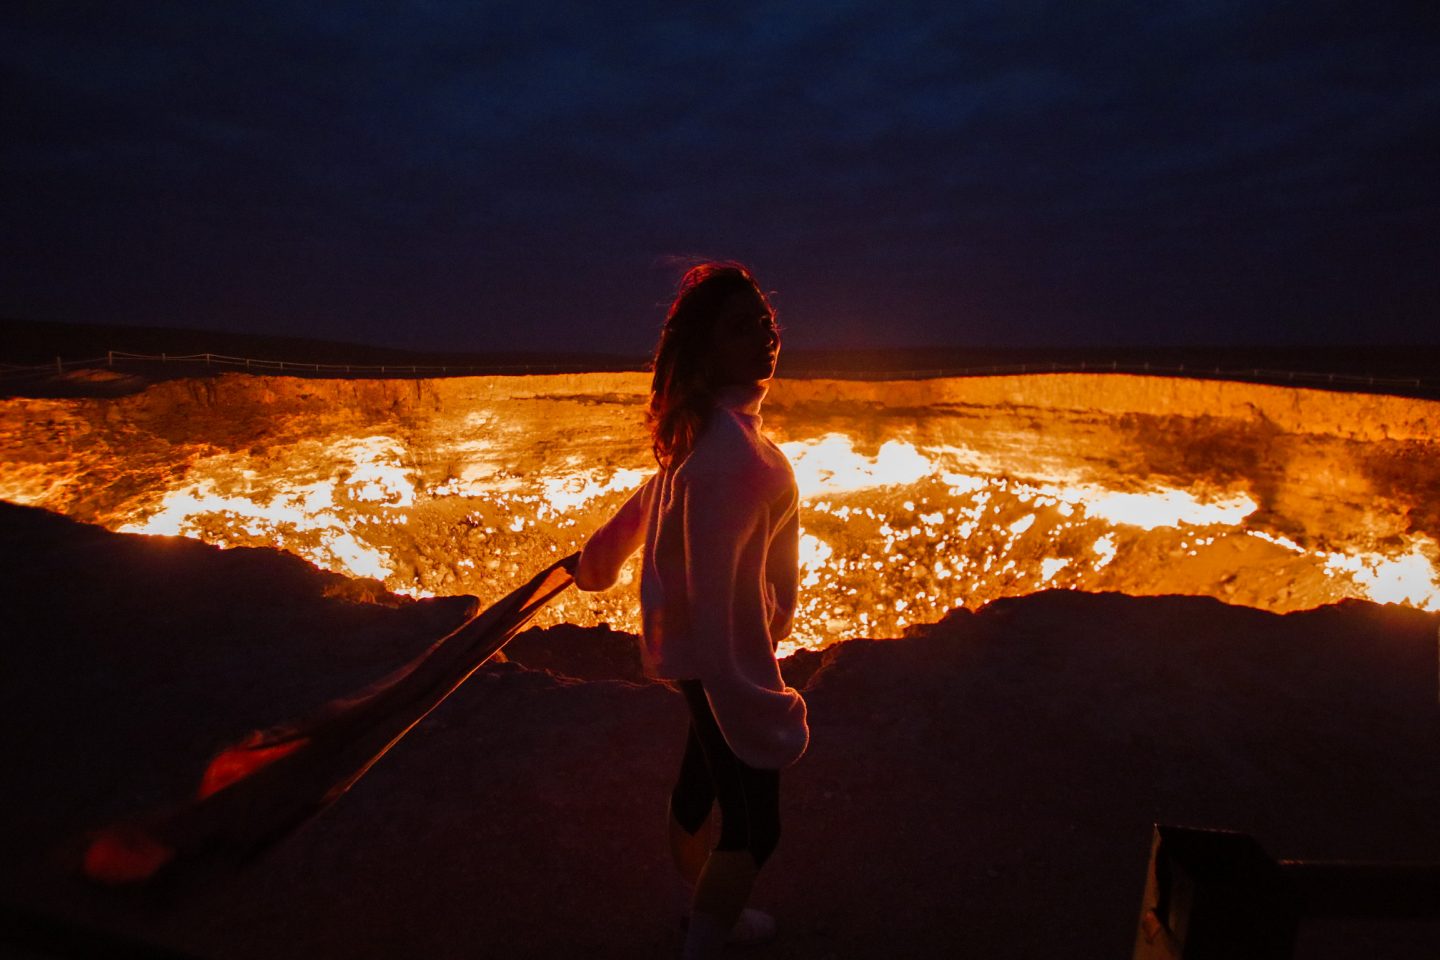 The door to hell at night